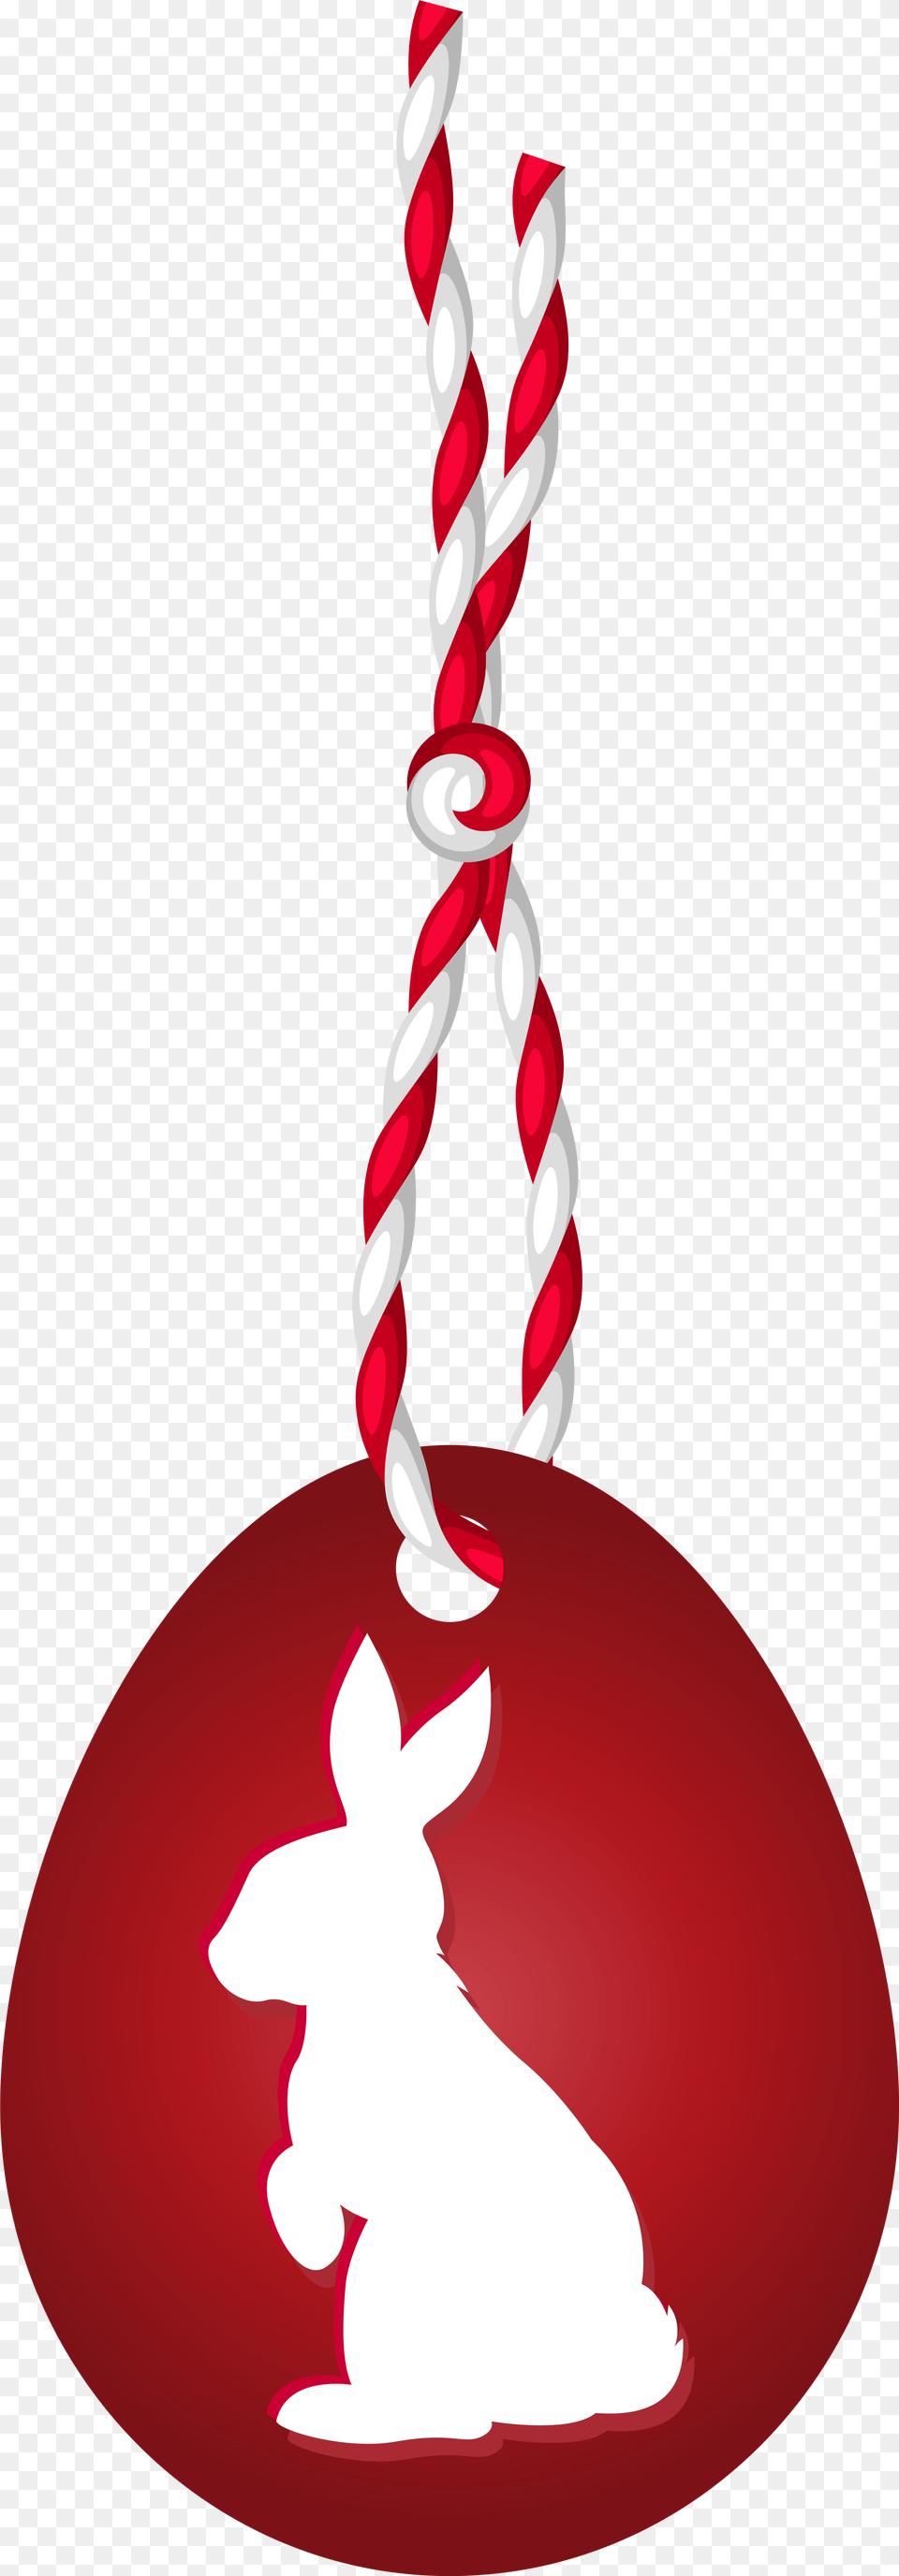 Hanging Christmas Stockings Clipart Image Royalty Accessories, Lighting, Dynamite, Weapon Free Transparent Png